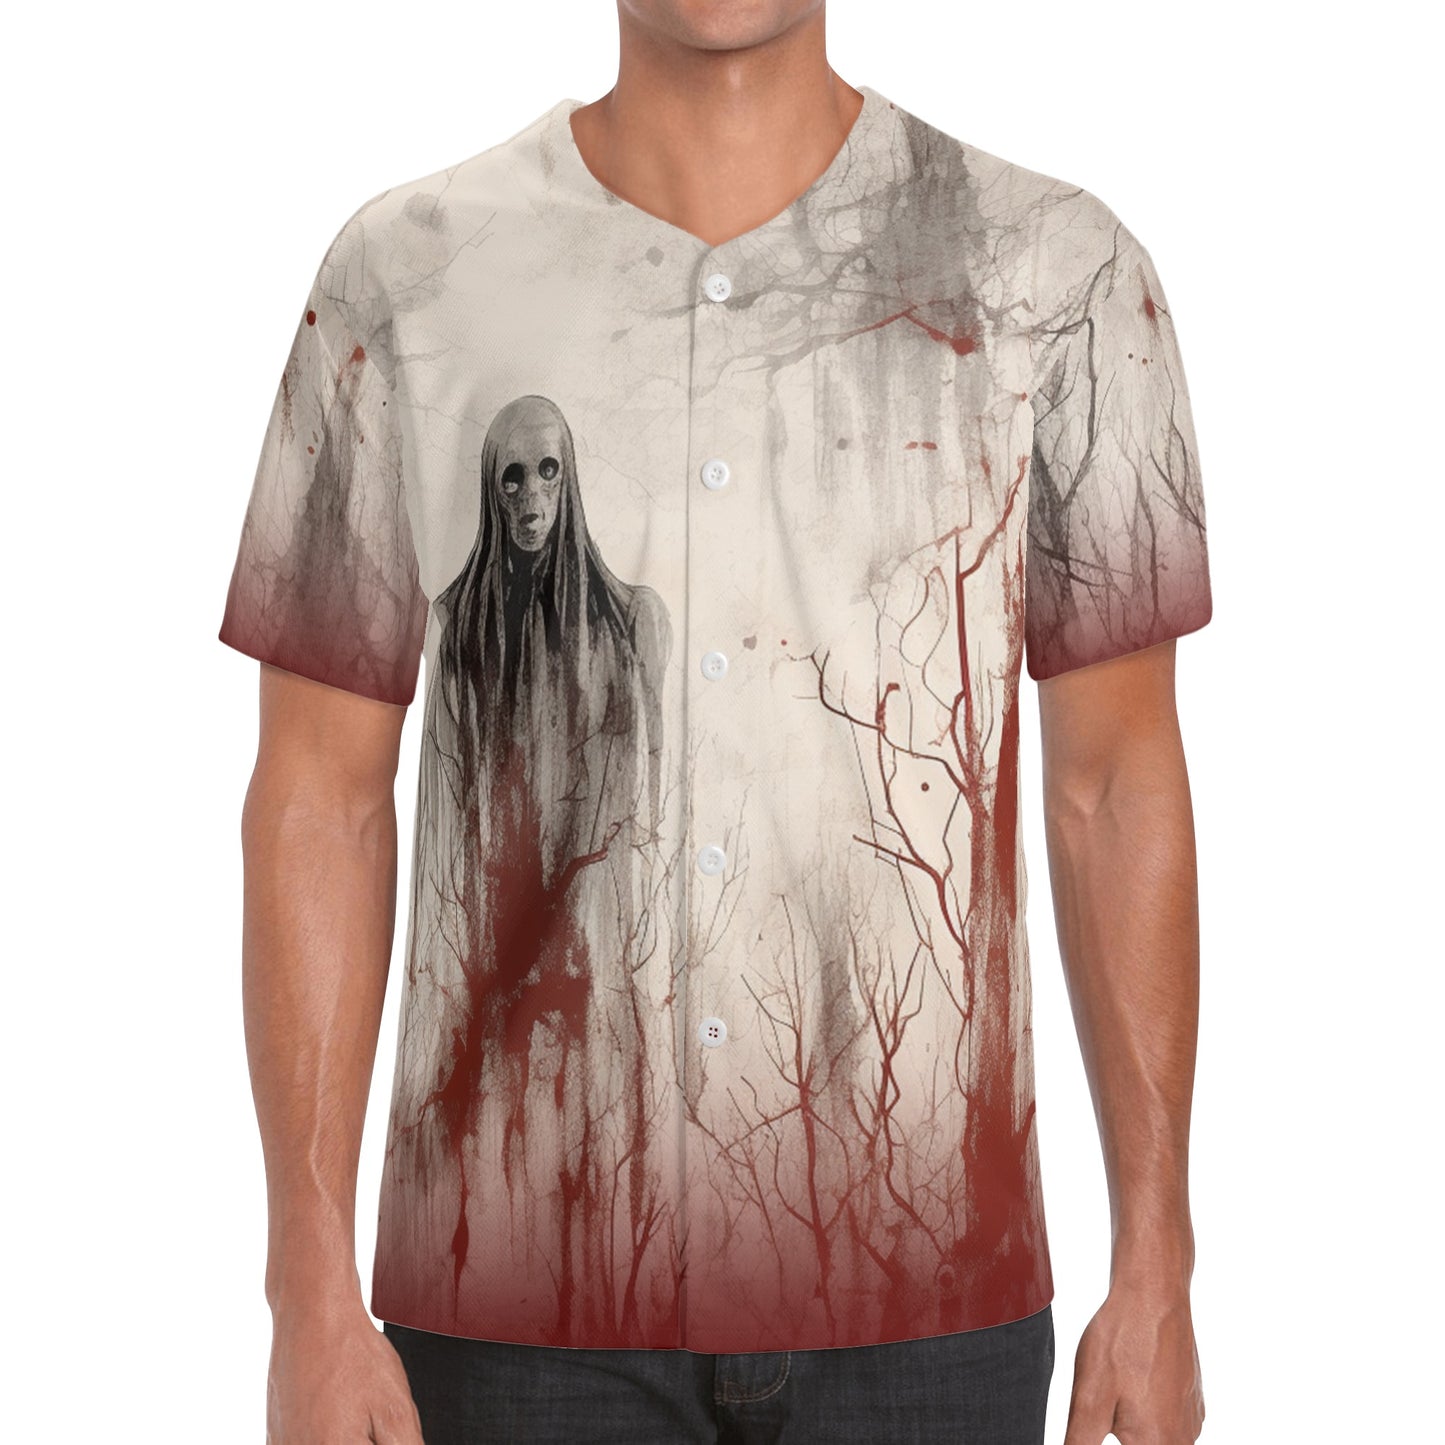 Neduz Mens Horror Spooky Short Sleeve Baseball Jersey: Stay Spooky and Stylish on the Field or in the Stands